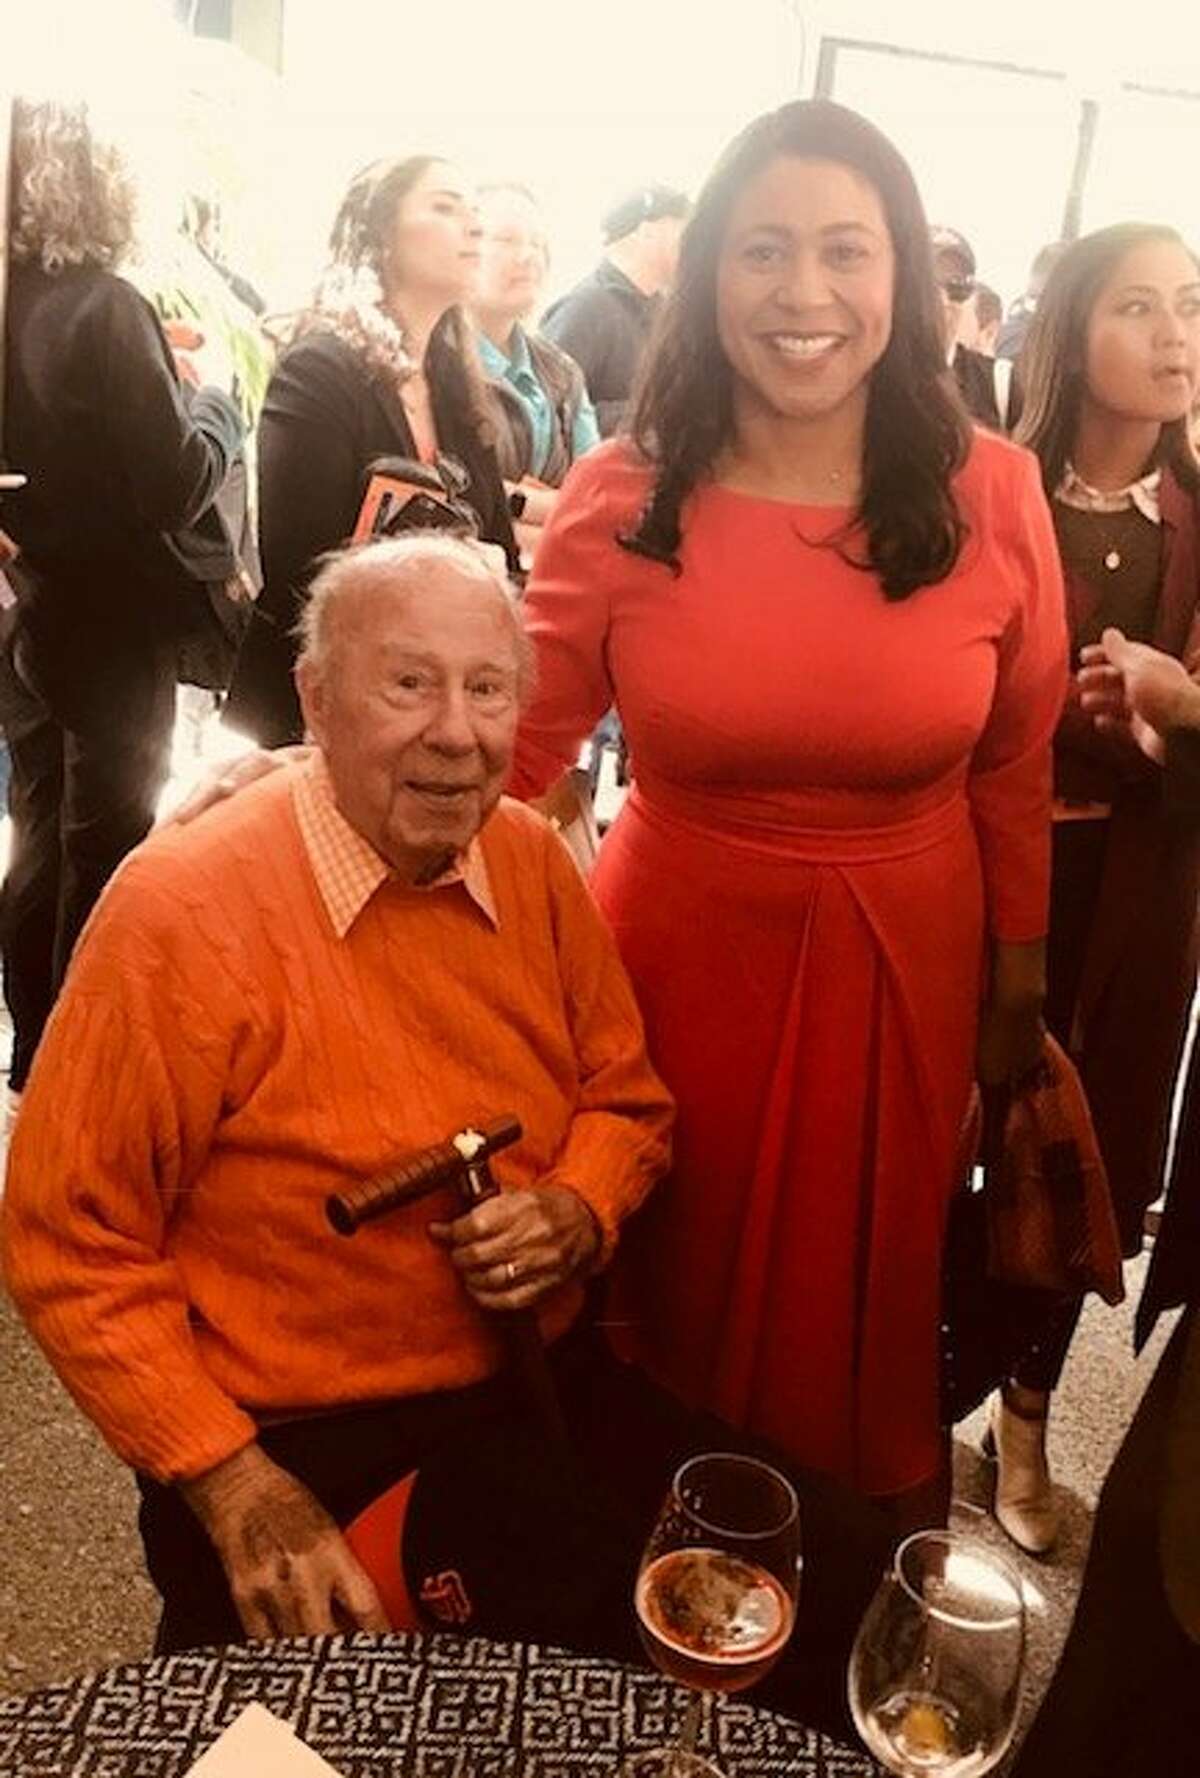 George Shultz and London Breed on Giants Opening Day